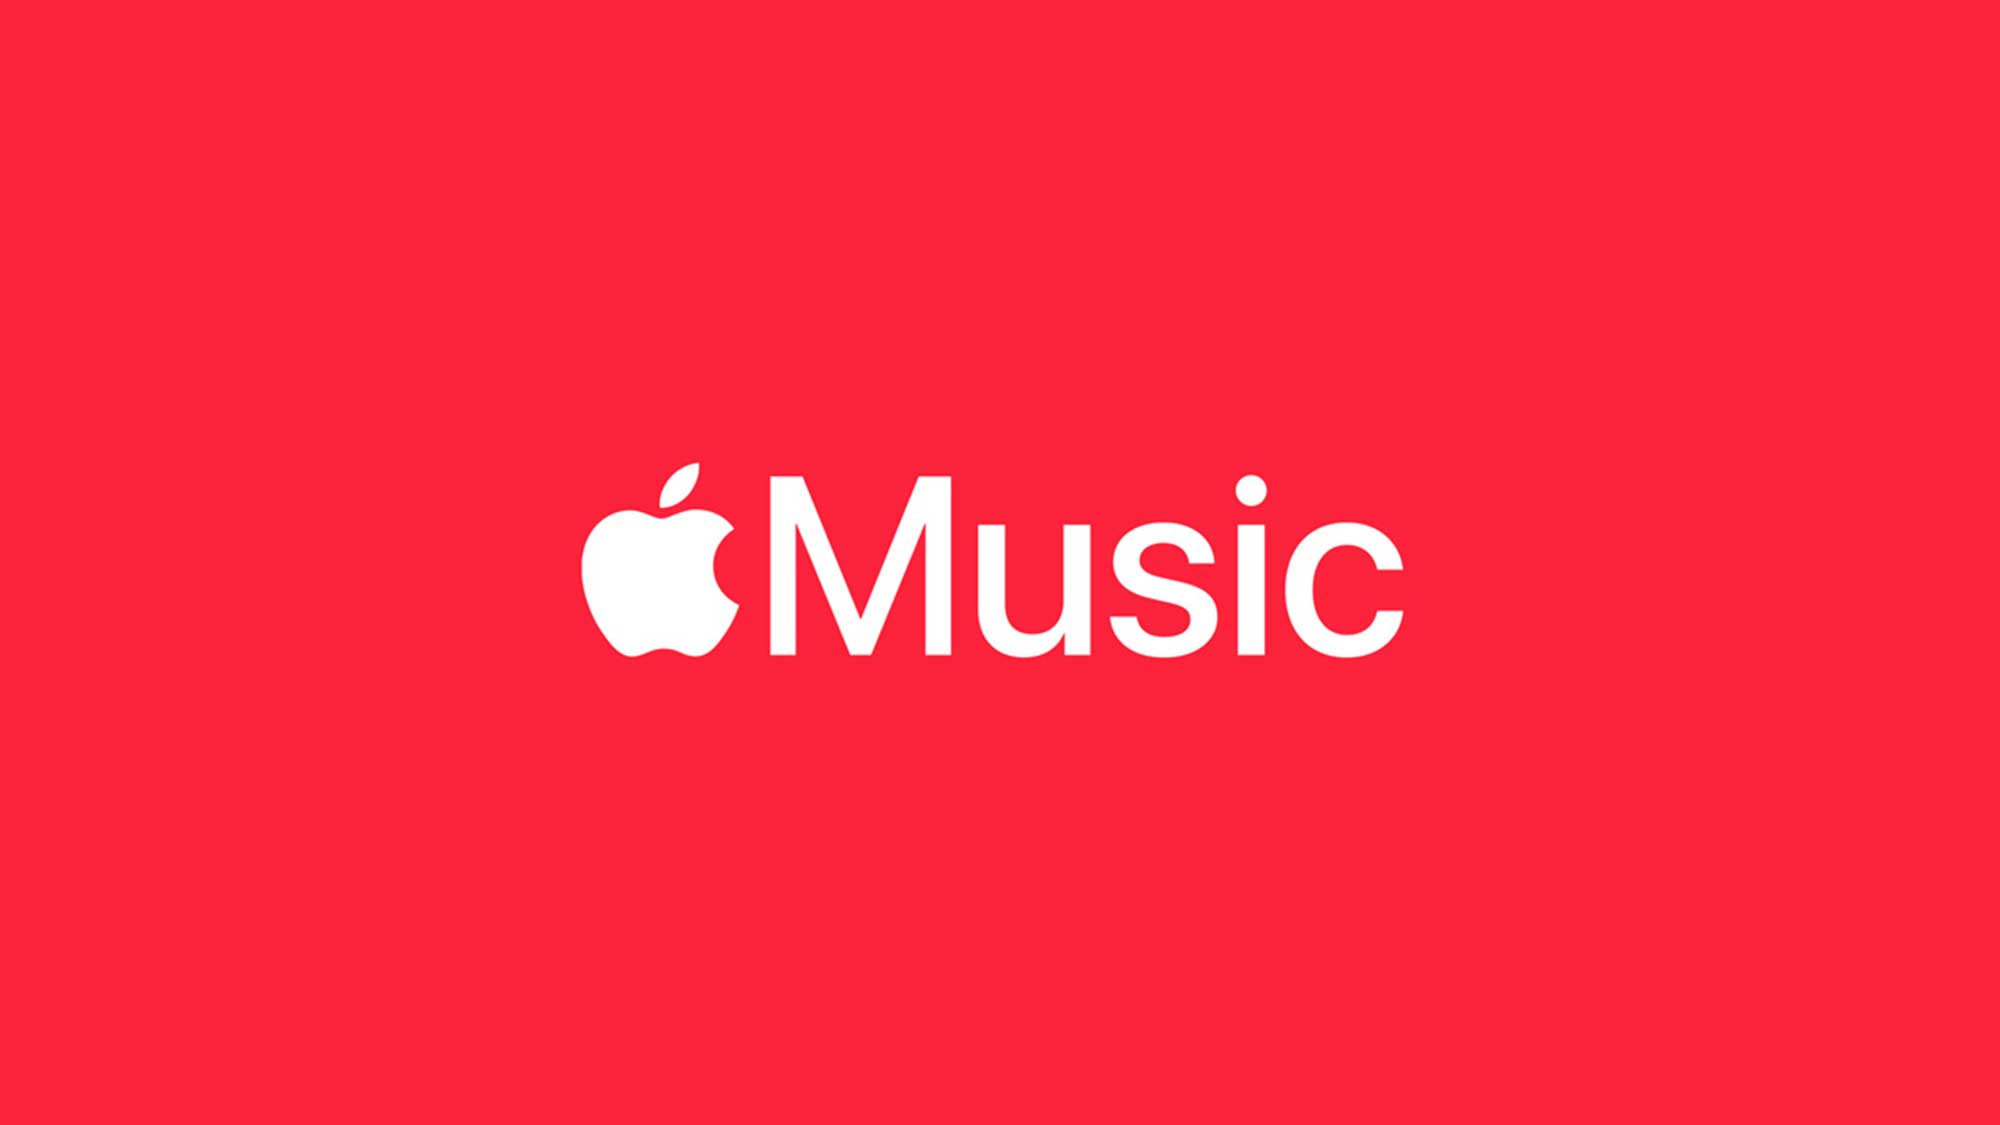 Apple Music logo on red background